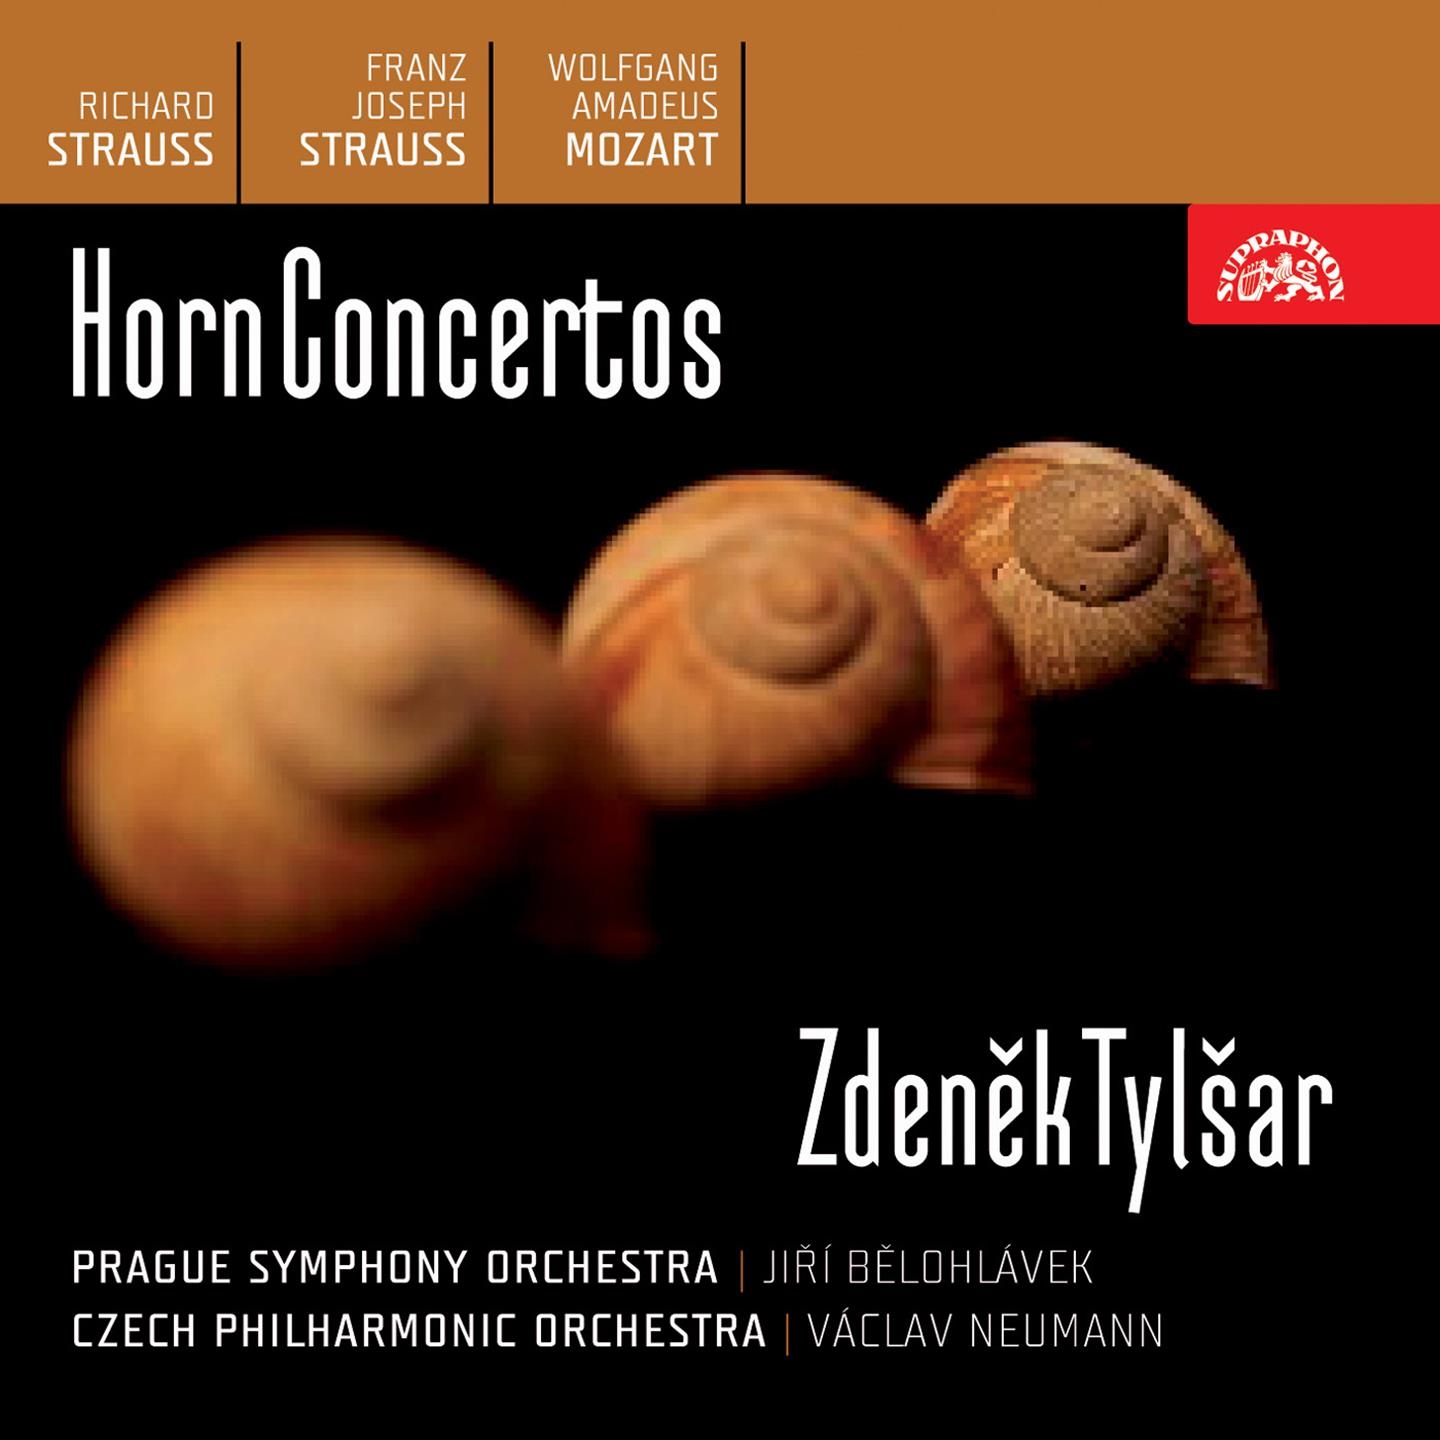 Concerto for French Horn and Orchestra No. 1 in E-Flat Major, Op. 11, .: II. Andante /att./